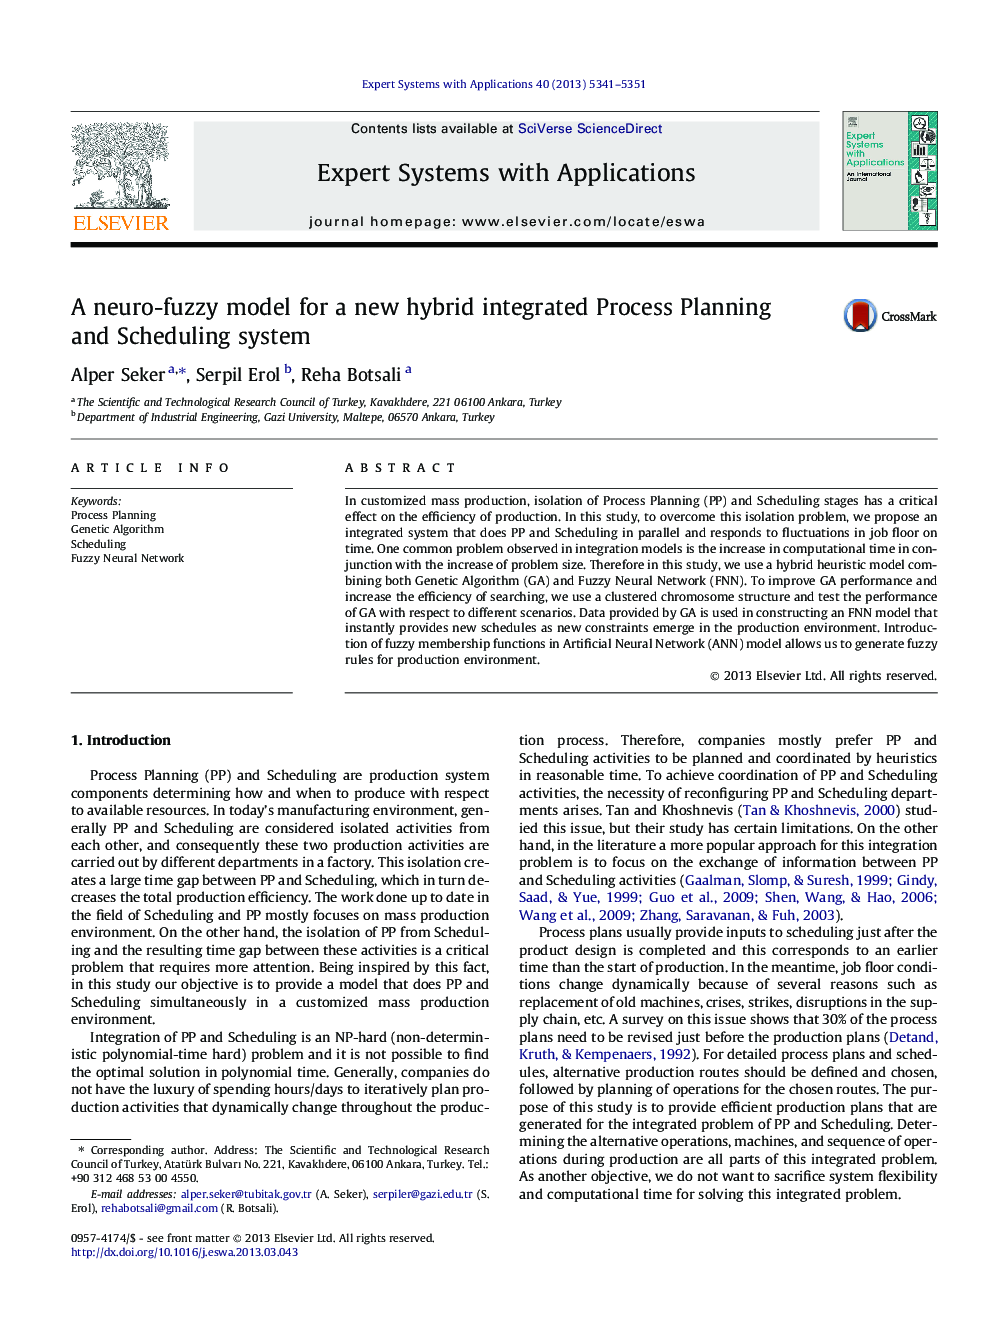 A neuro-fuzzy model for a new hybrid integrated Process Planning and Scheduling system